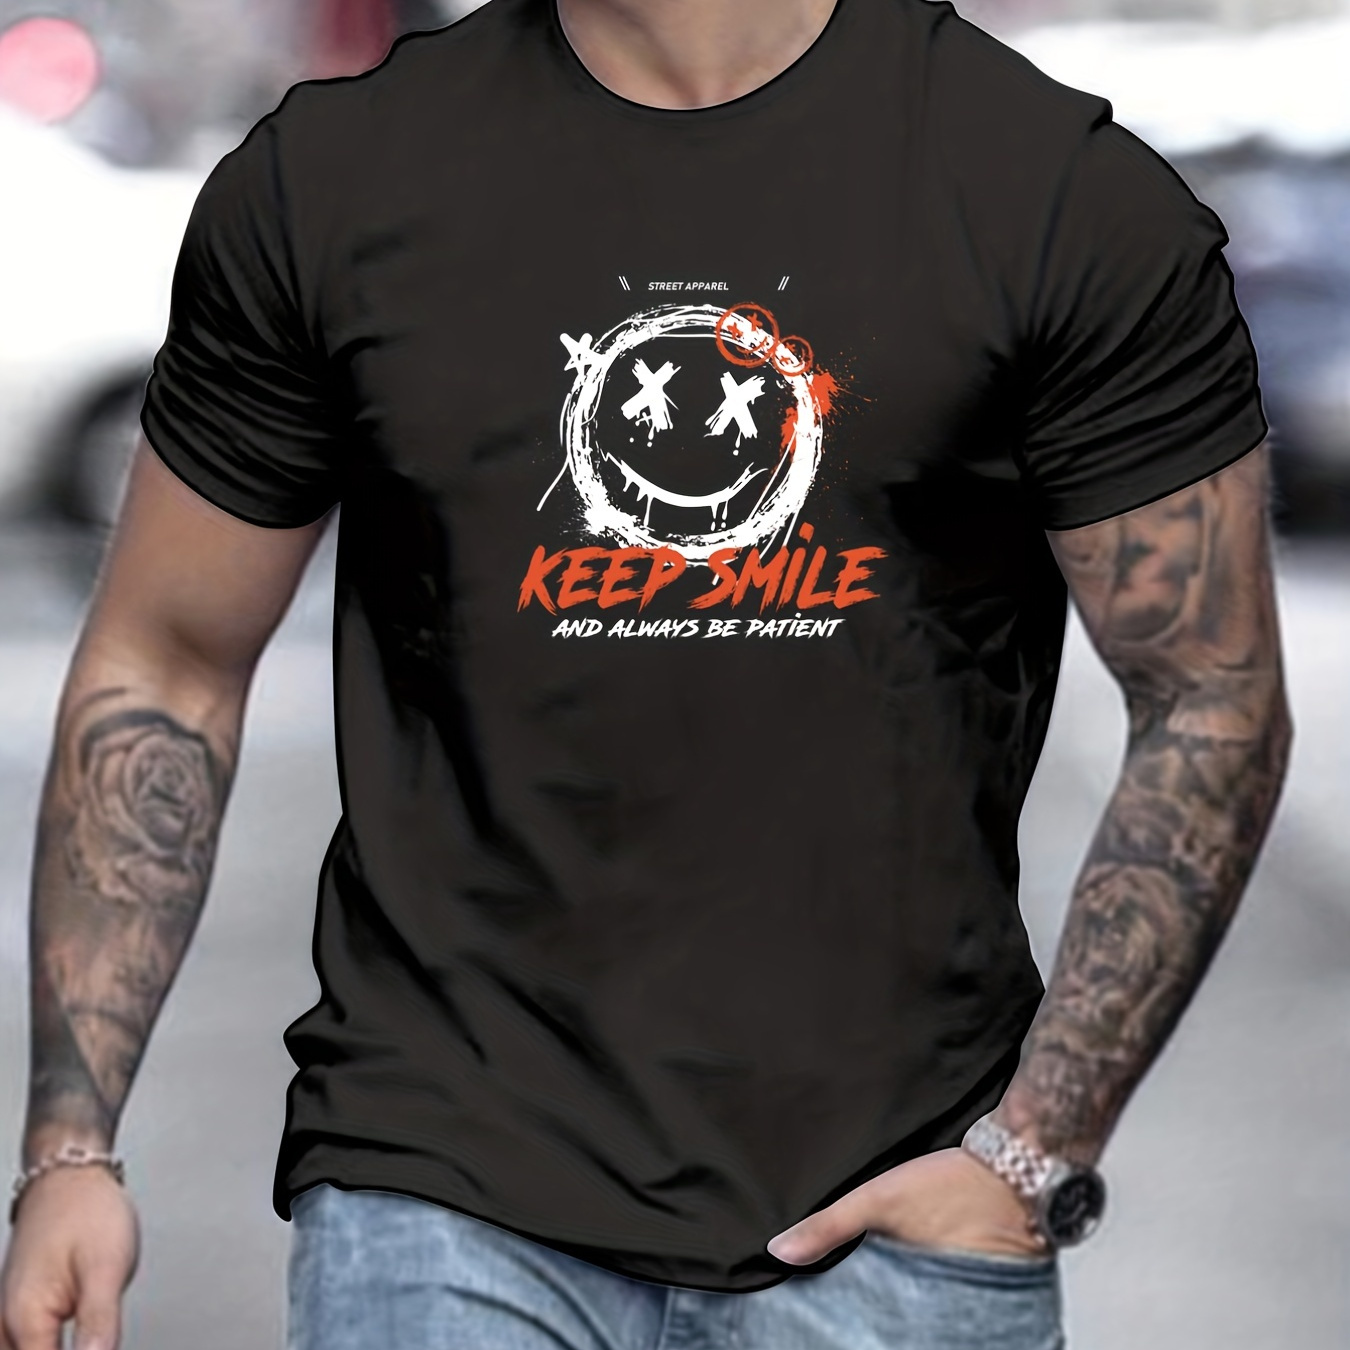 

Tees For Men, 'keep Smile' Print T Shirt, Casual Short Sleeve Tshirt For Summer Spring Fall, Tops As Gifts